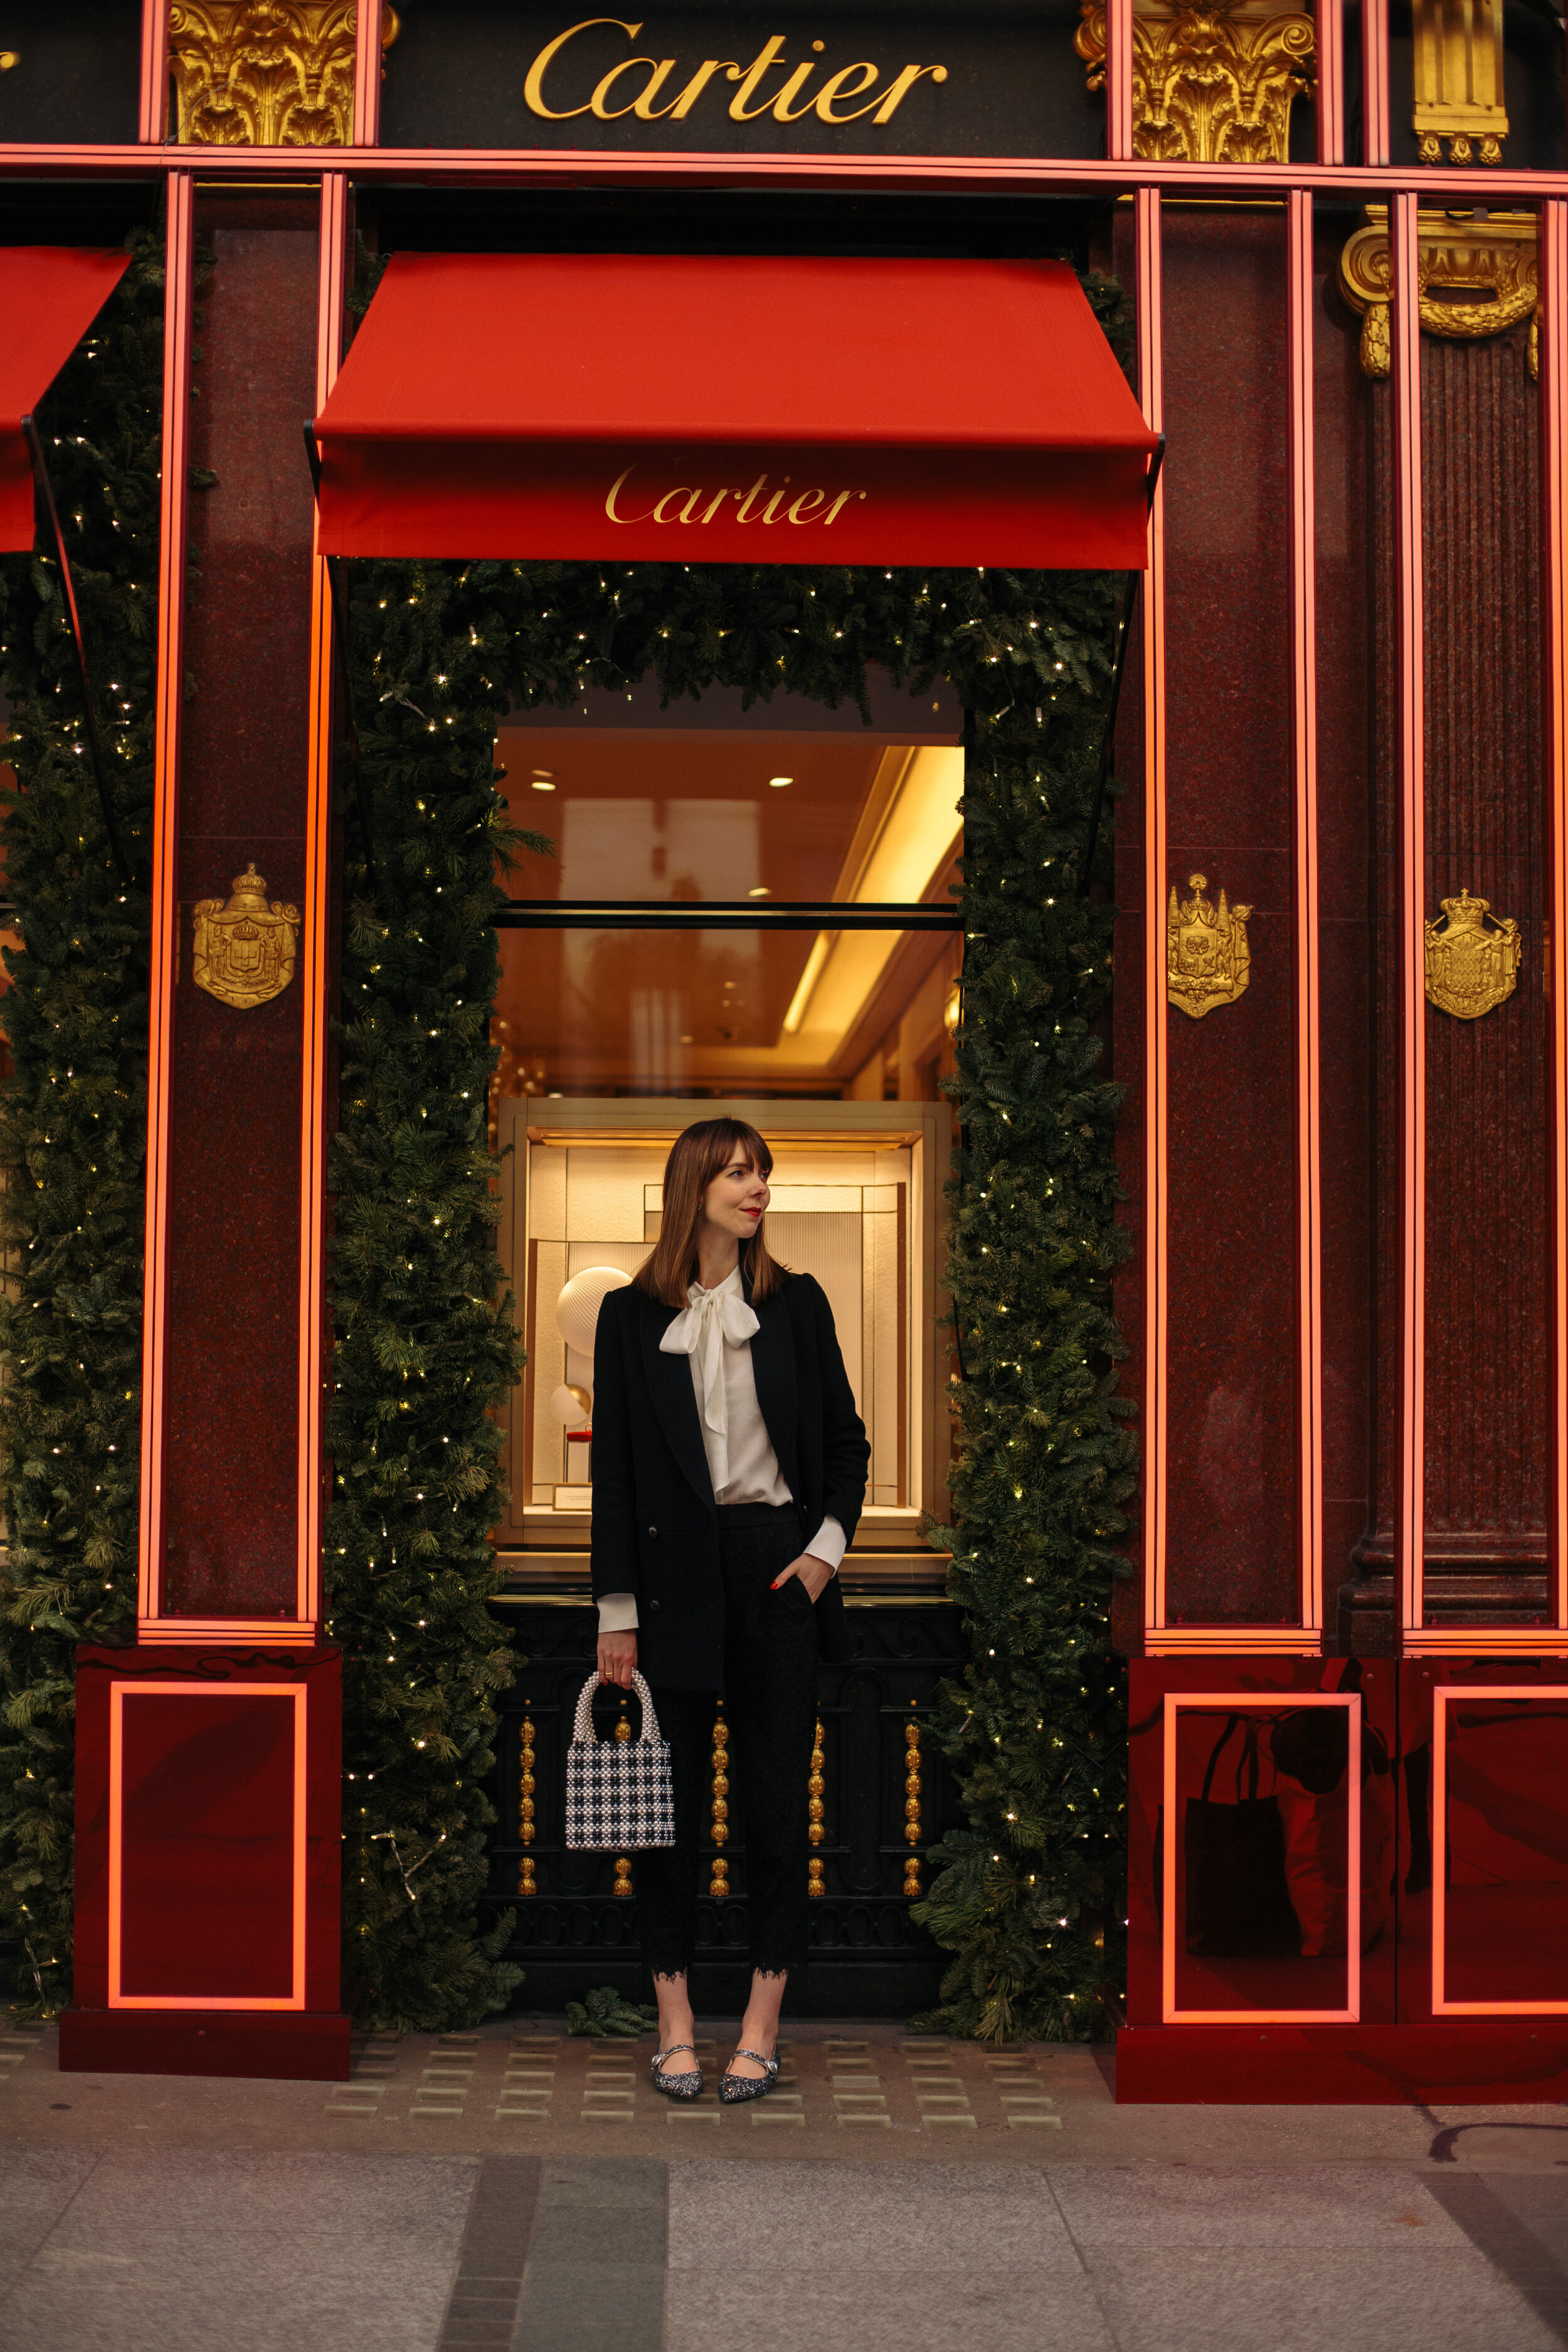 cartier london phone number